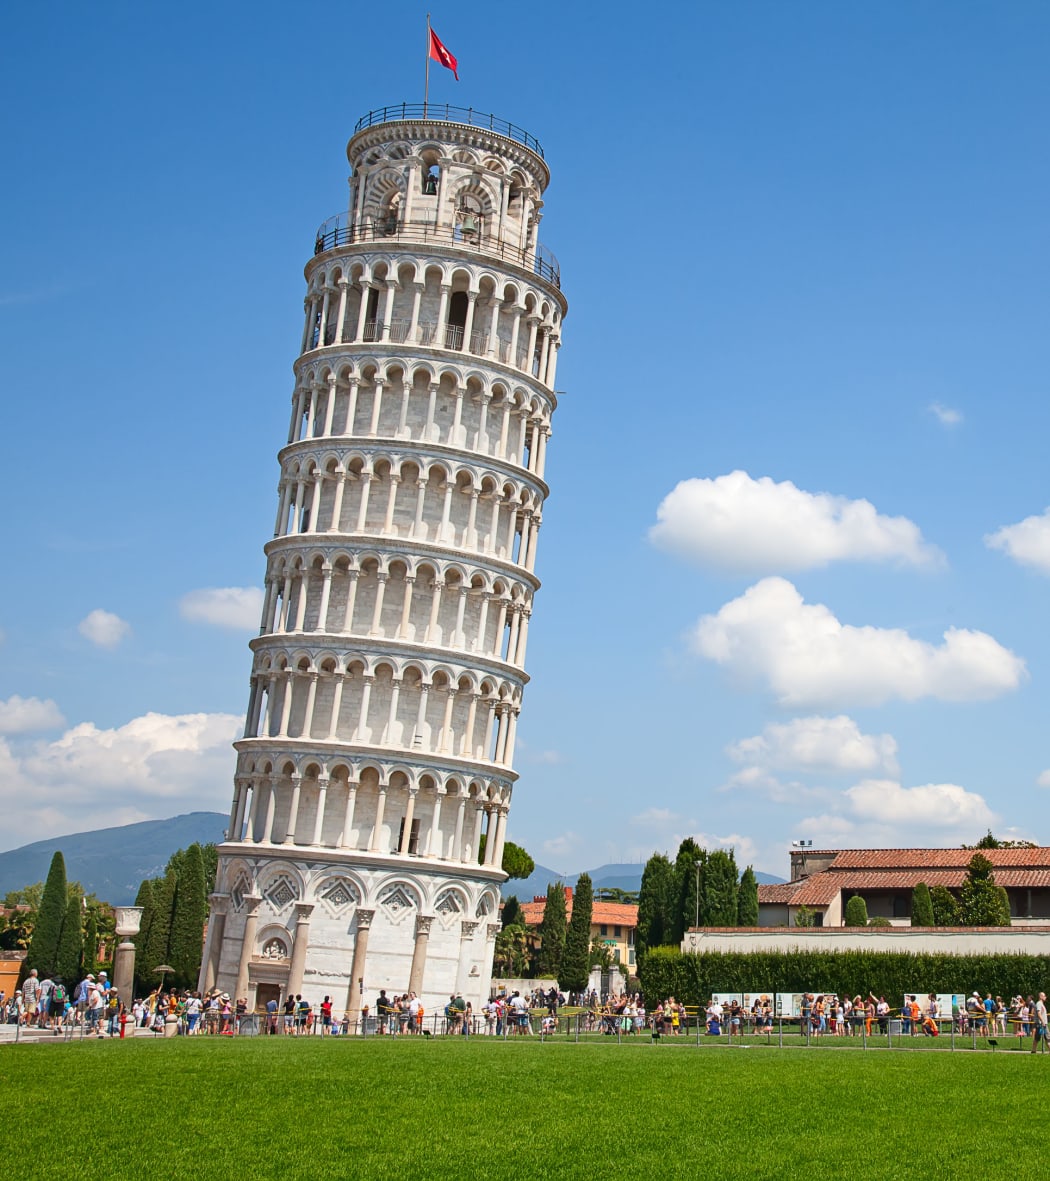 The leaning tower of Pisa.